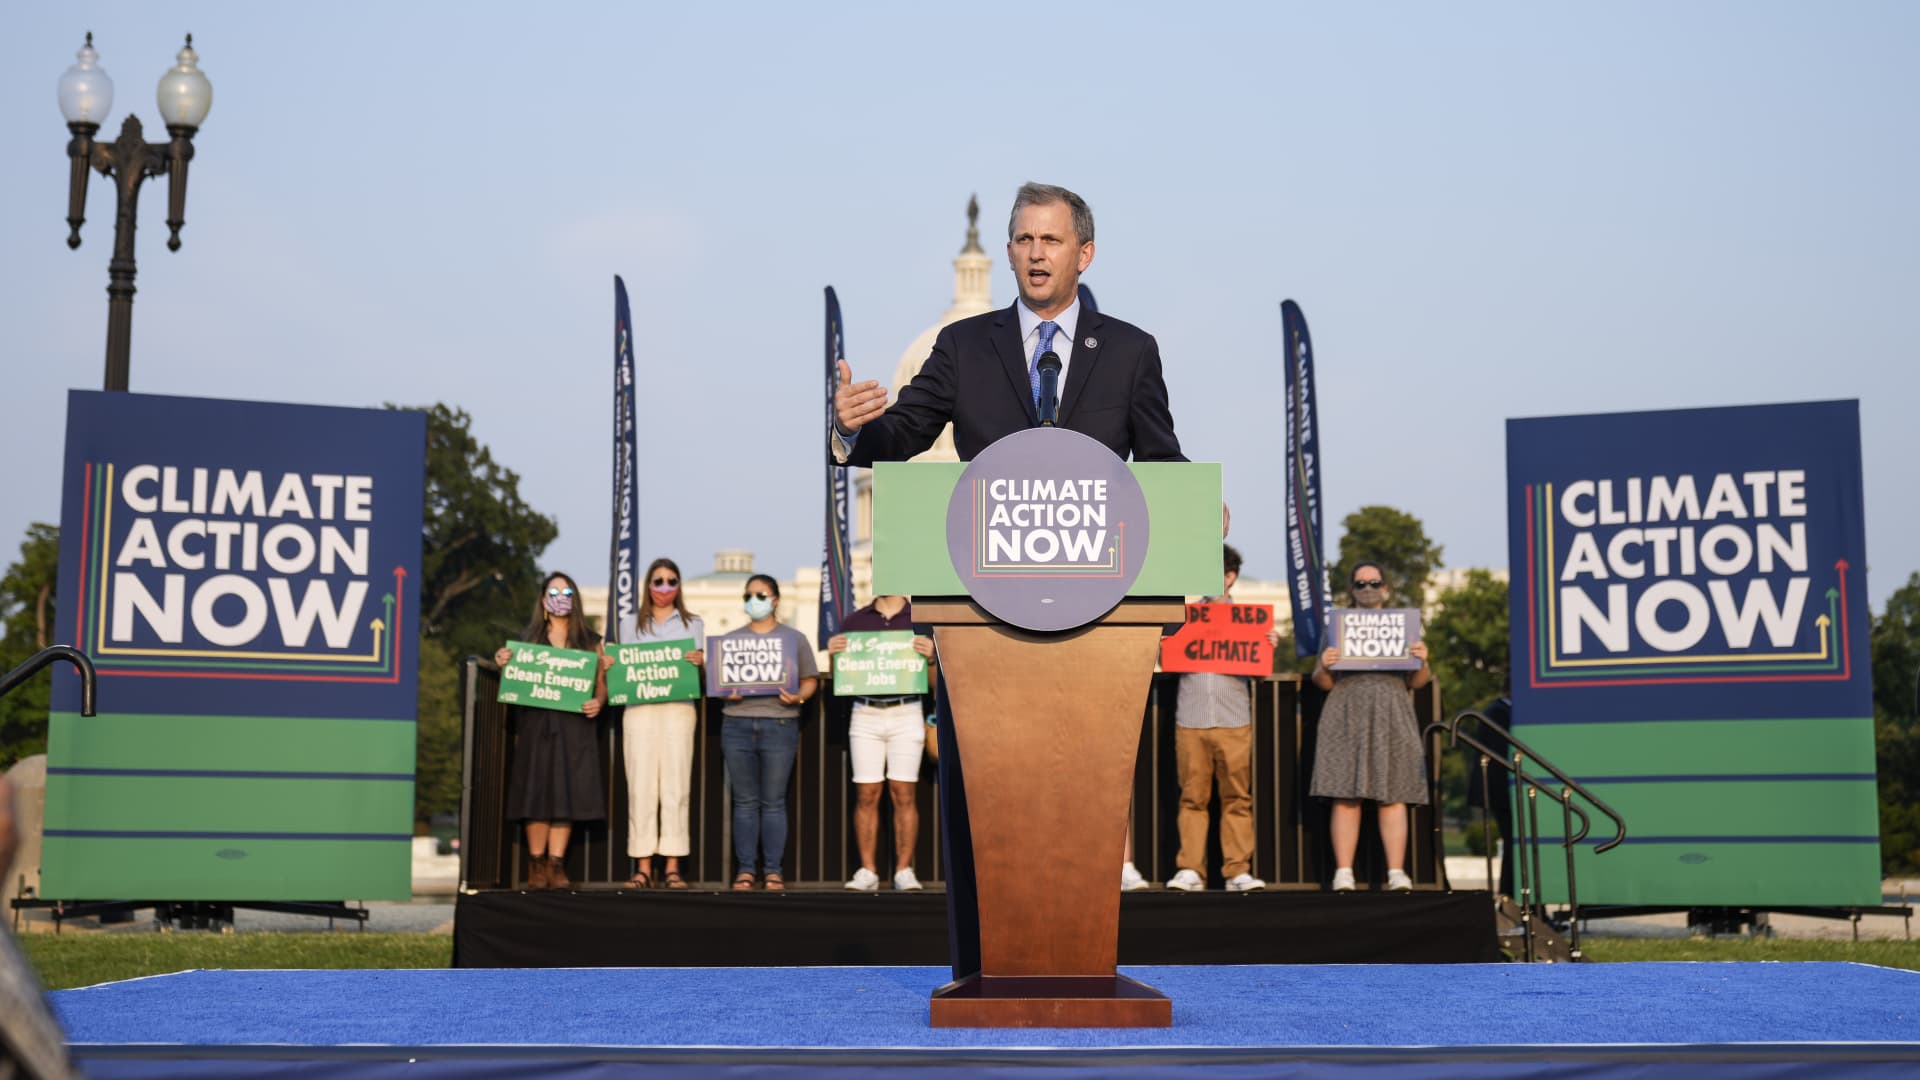 Rep. Sean Casten speaks during a rally about climate change issues near the U.S. Capitol on September 13, 2021 in Washington, DC.